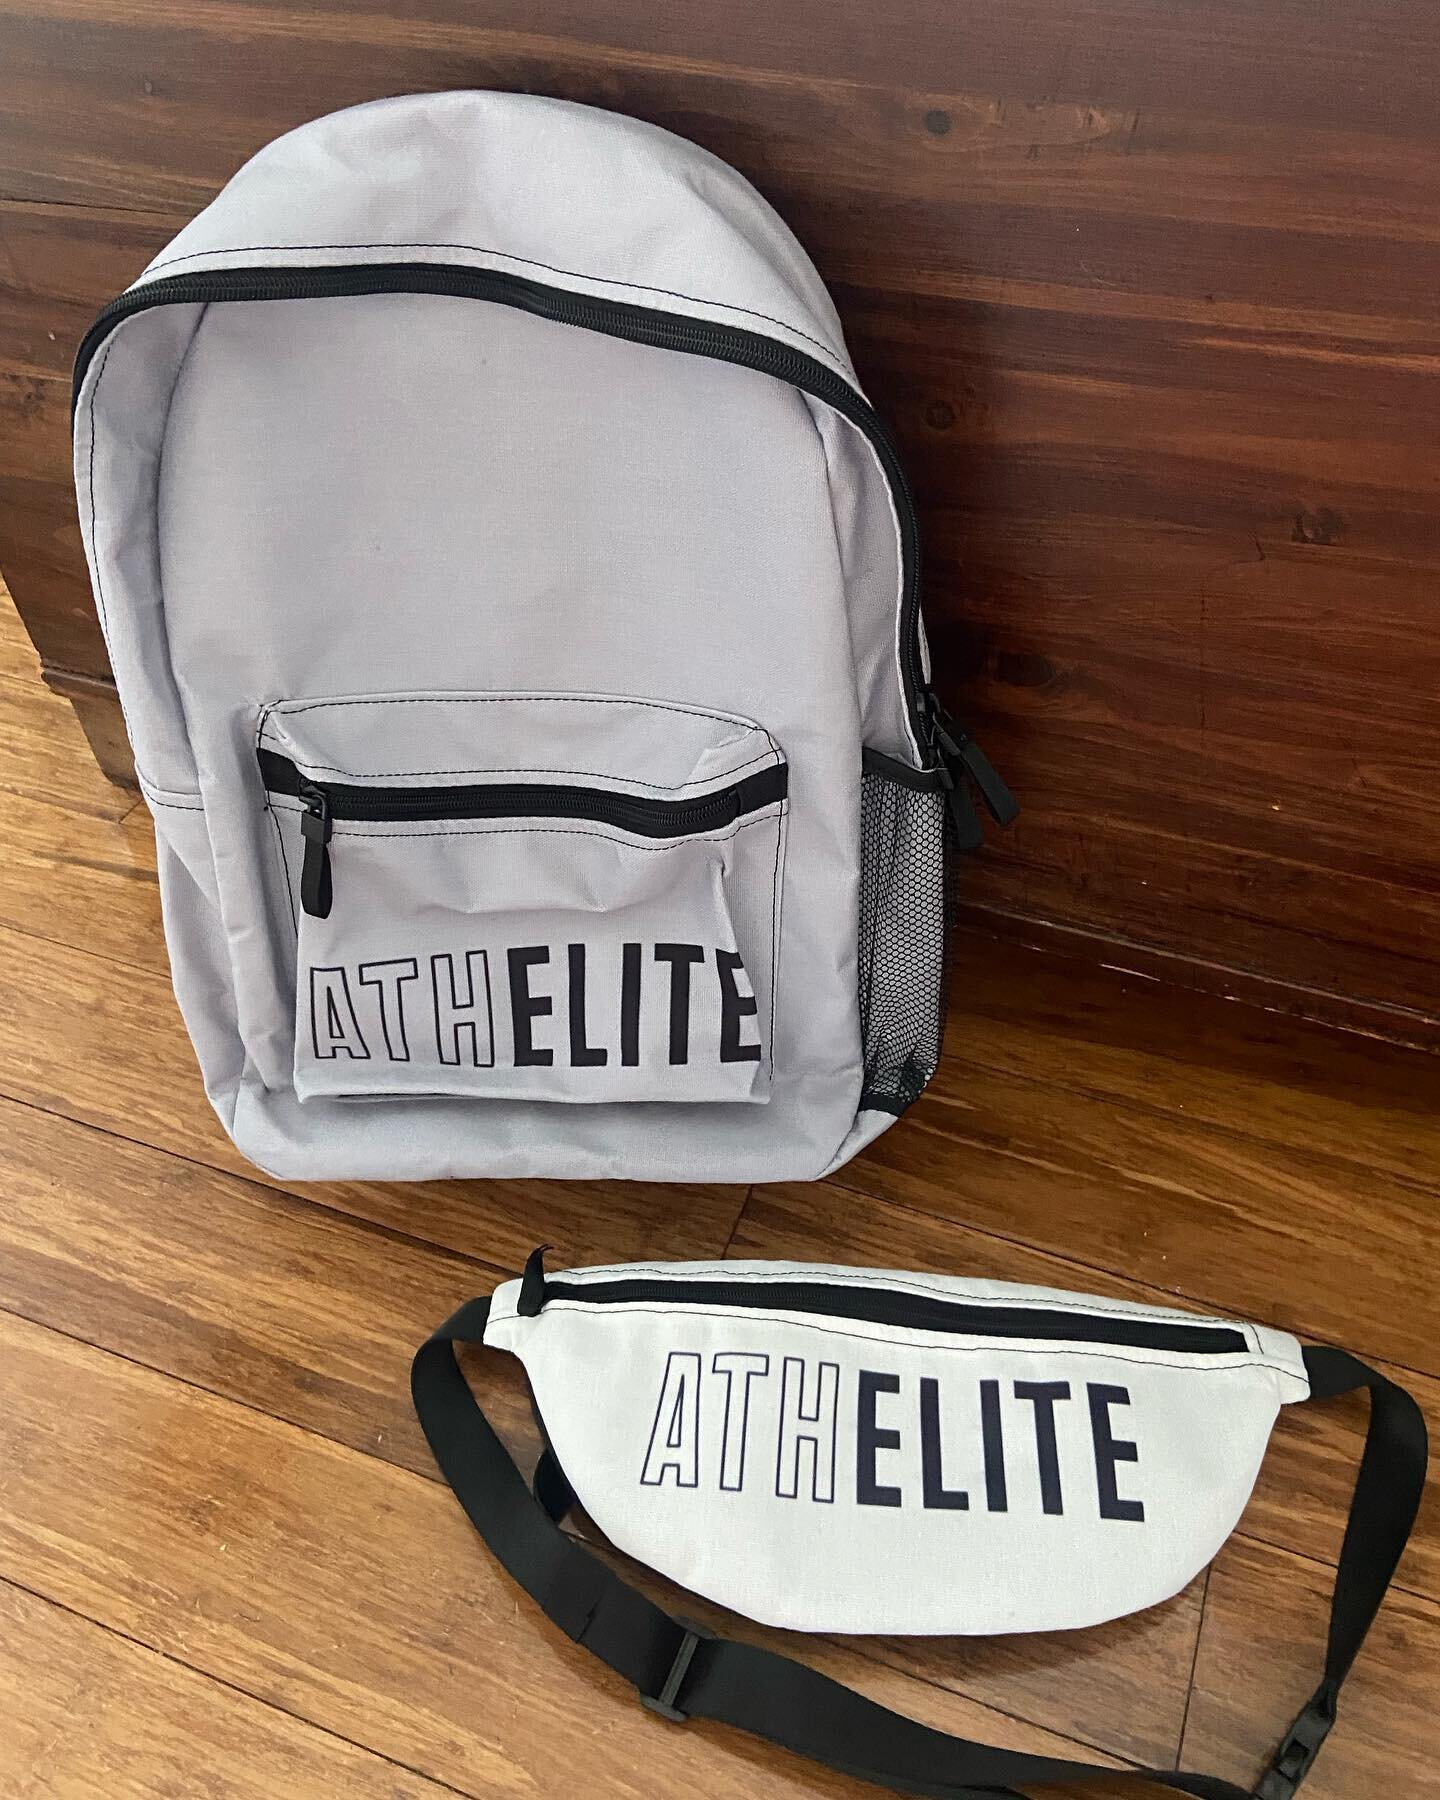 ATHELITE Merch!  Shop link in bio to grab yours! 

Tag us @__atheELITE__ to be featured on our IG and website! 

We love our Fanny pack - whether running errands or running trails keep your essentials in close reach!

Our backpack is great for carryi